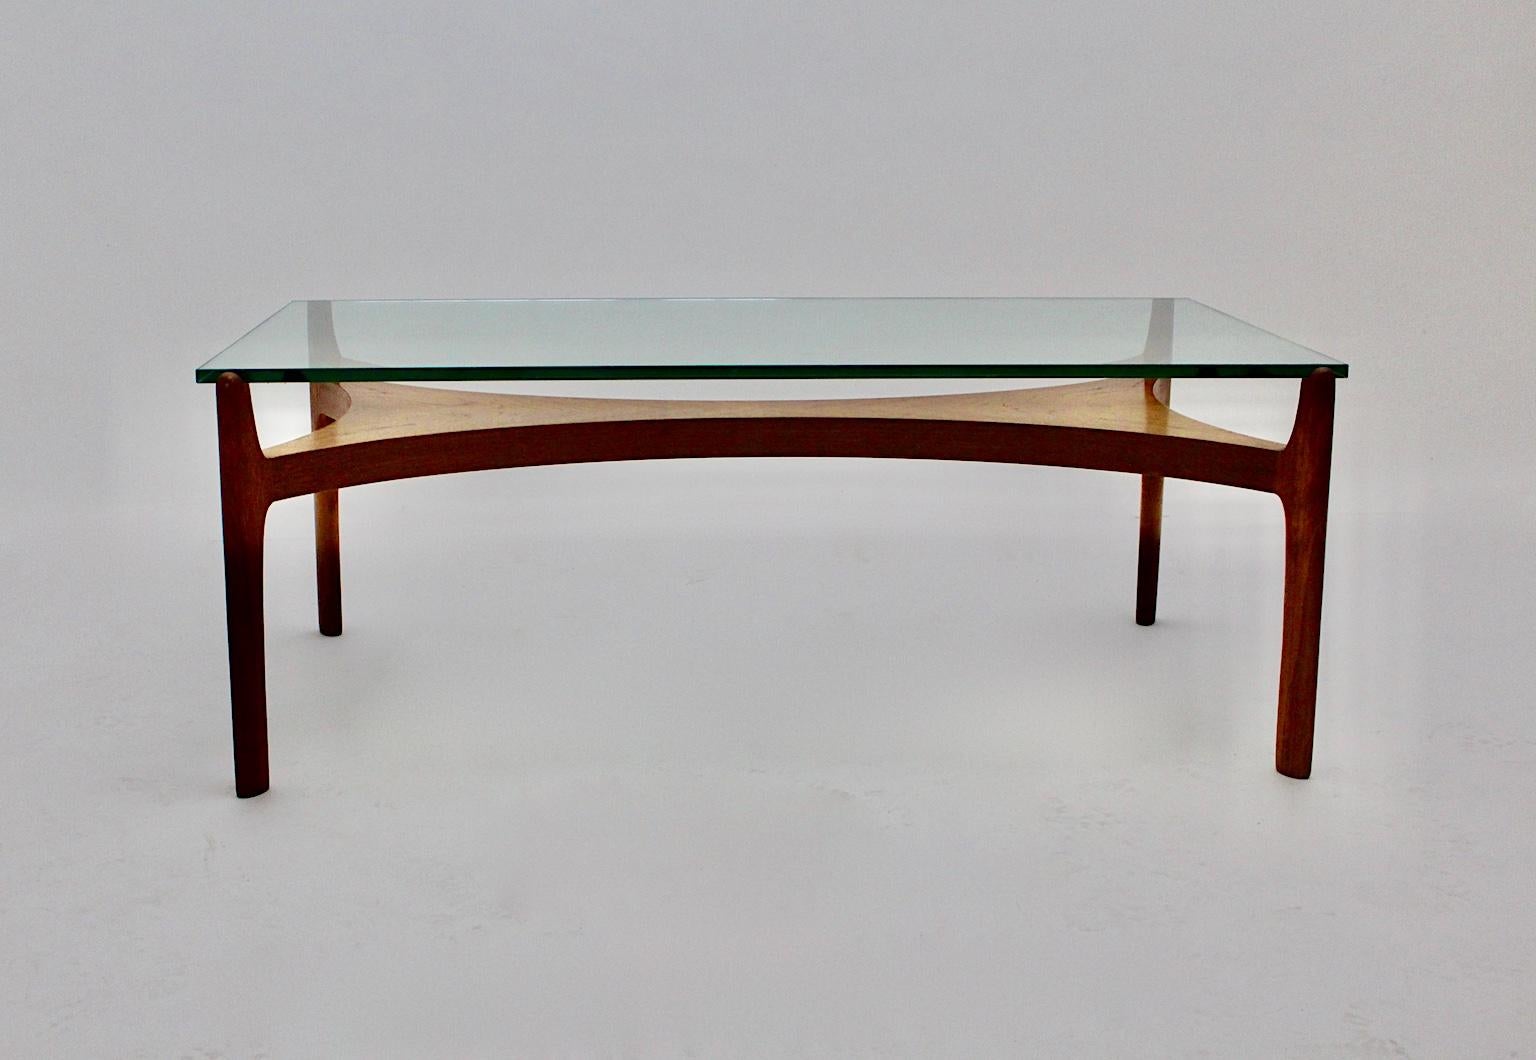 A Scandinavian Modern vintage coffee table designed by Sven Ellekaer 1960s, which was made of solid teak and veneered teak. The sculptural teak base is topped with an original clear glass plate with a thickness of 15 mm.
The vintage condition of